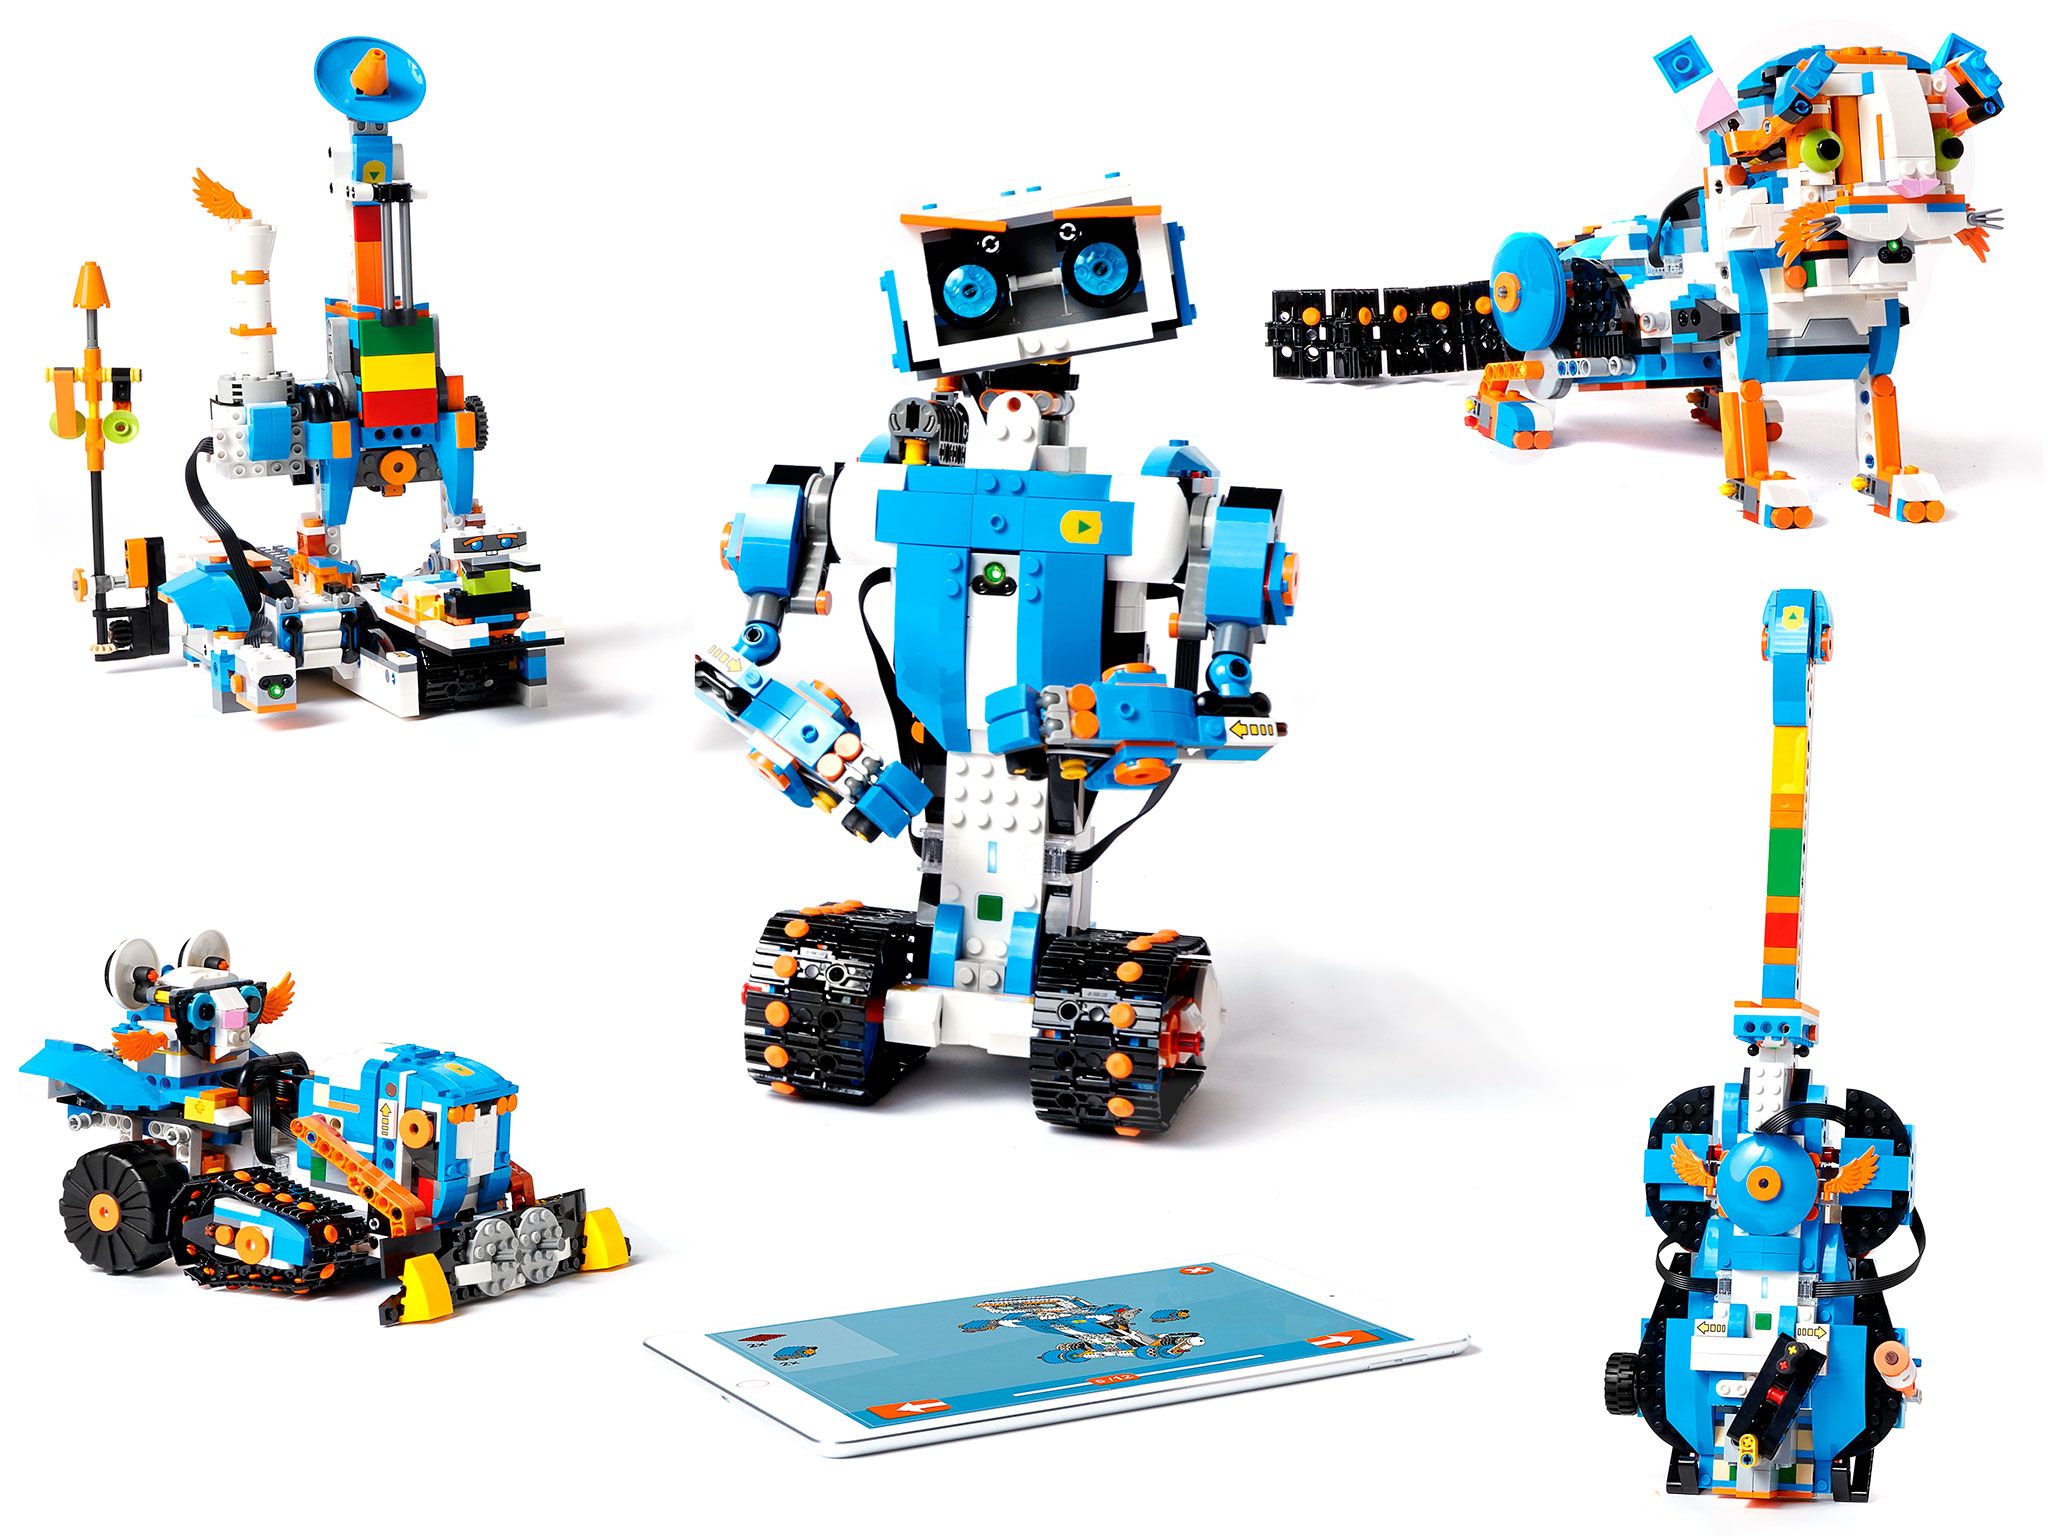 Lego Boost - ROBOTS: Your Guide to the World of Robotics